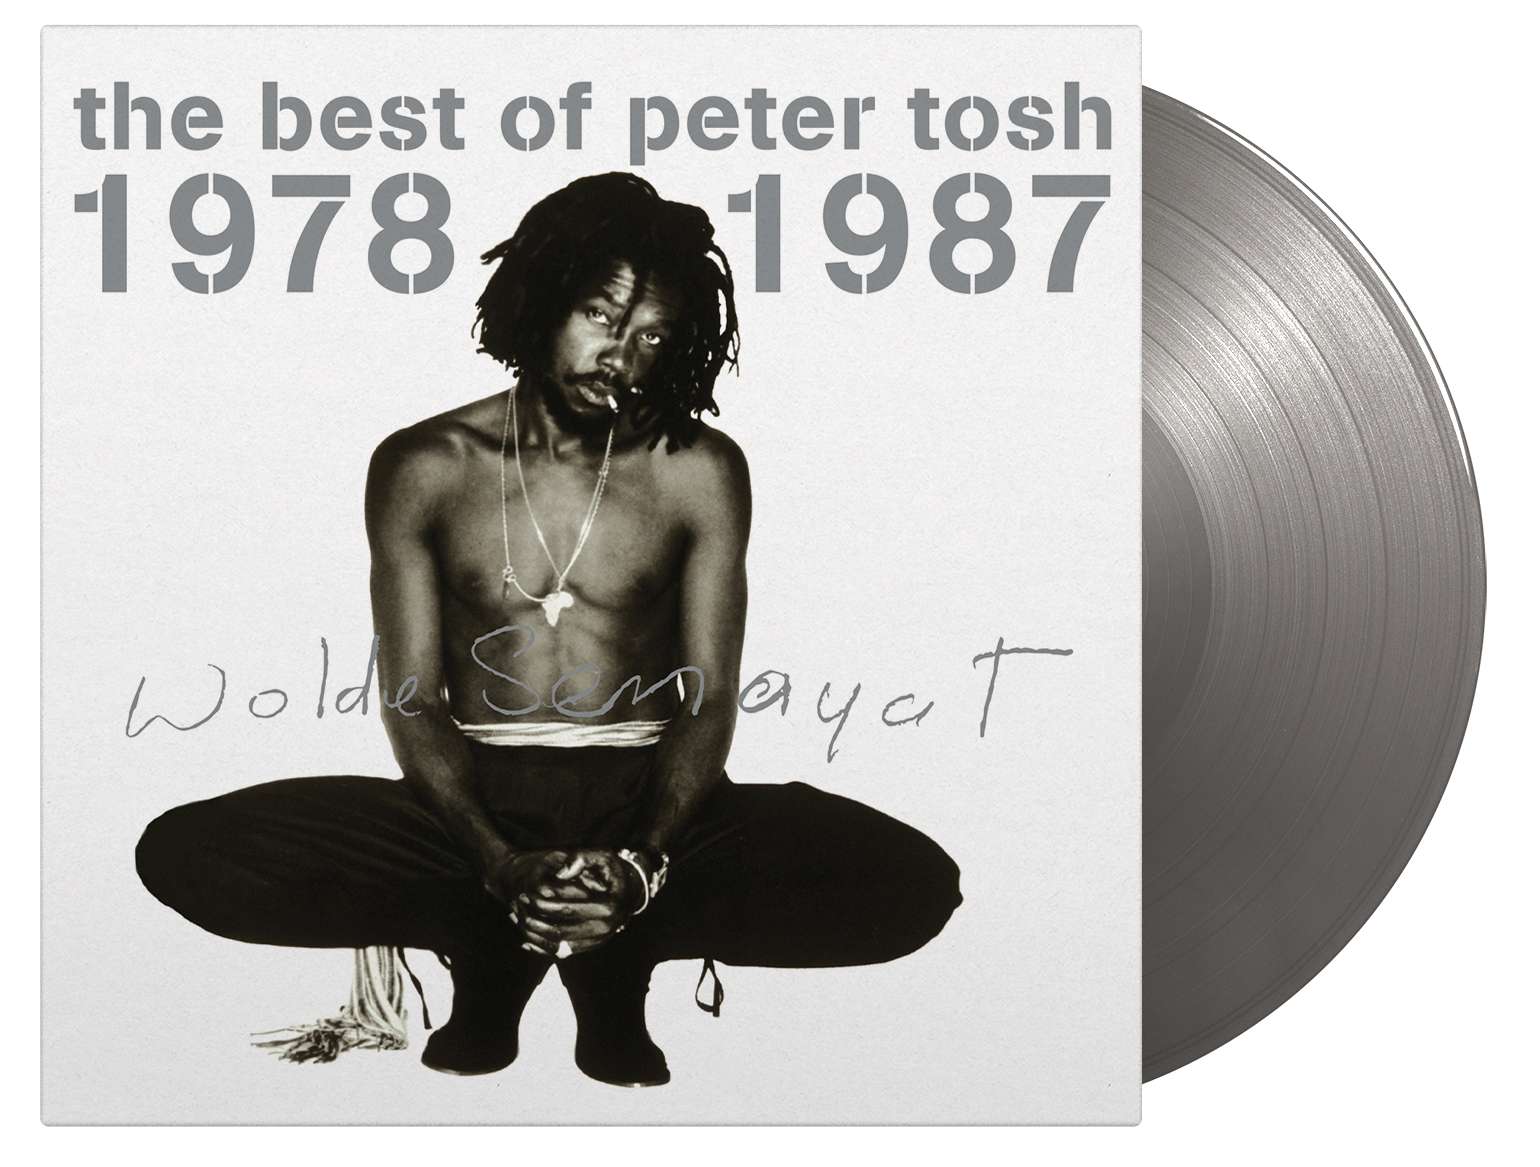 Peter Tosh - The Best Of Peter Tosh 1978-1987 - 33RPM